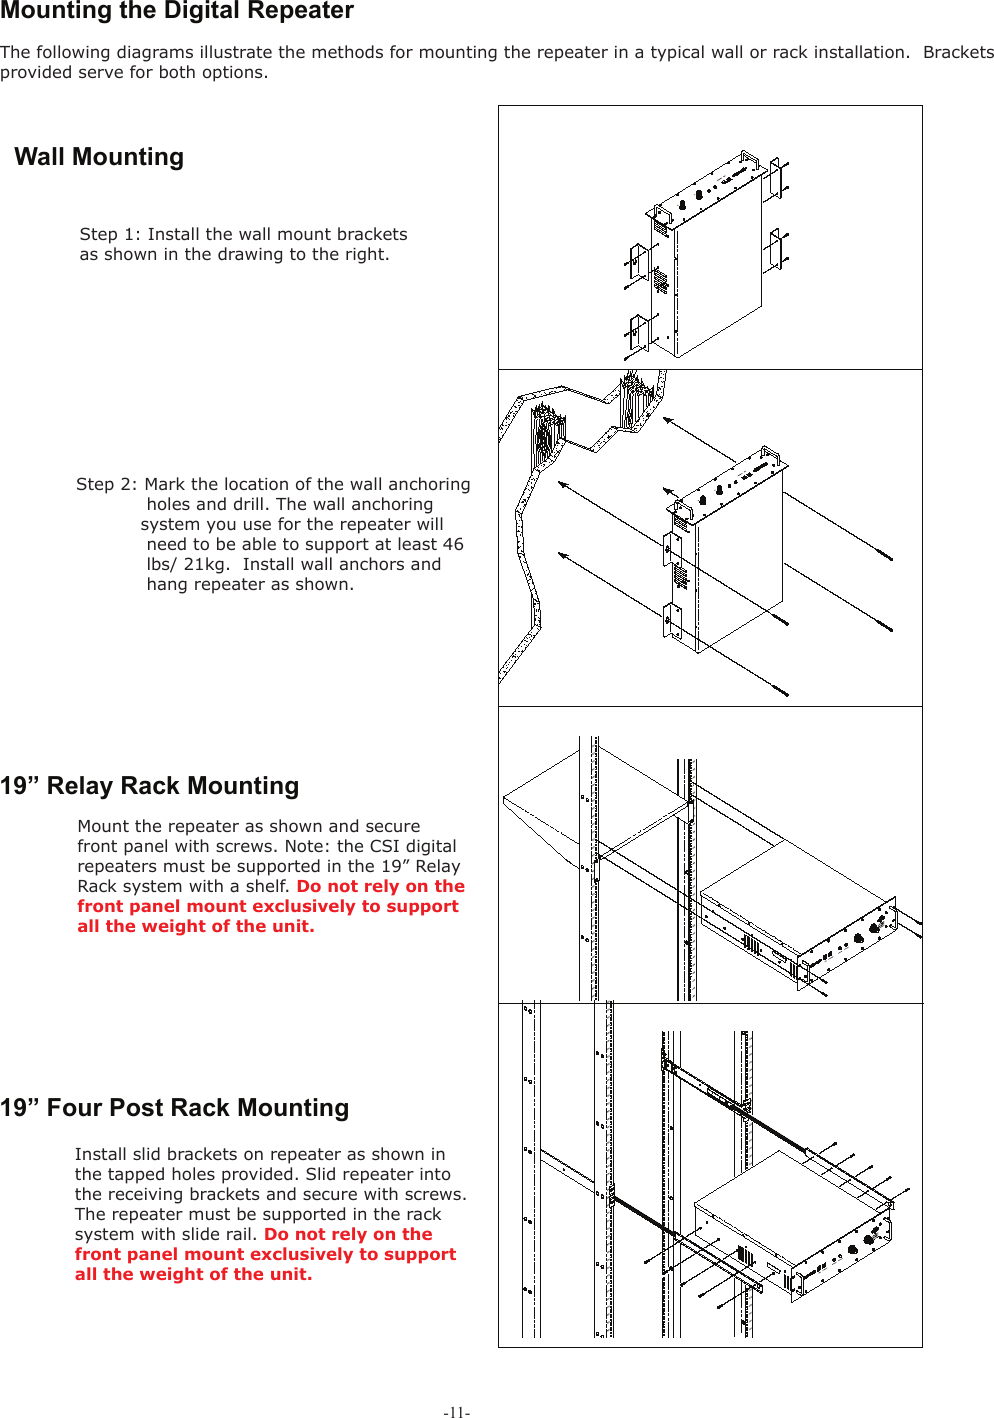 -11- Mounting the Digital RepeaterThe following diagrams illustrate the methods for mounting the repeater in a typical wall or rack installation.  Brackets provided serve for both options.Step 2: Mark the location of the wall anchoring            holes and drill. The wall anchoring            system you use for the repeater will            need to be able to support at least 46             lbs/ 21kg.  Install wall anchors and             hang repeater as shown.Step 1: Install the wall mount brackets as shown in the drawing to the right. Wall Mounting 19” Relay Rack Mounting Mount the repeater as shown and secure front panel with screws. Note: the CSI digital repeaters must be supported in the 19” Relay Rack system with a shelf. Do not rely on the front panel mount exclusively to support all the weight of the unit.Install slid brackets on repeater as shown in the tapped holes provided. Slid repeater into the receiving brackets and secure with screws. The repeater must be supported in the rack system with slide rail. Do not rely on the front panel mount exclusively to support all the weight of the unit.19” Four Post Rack Mounting 